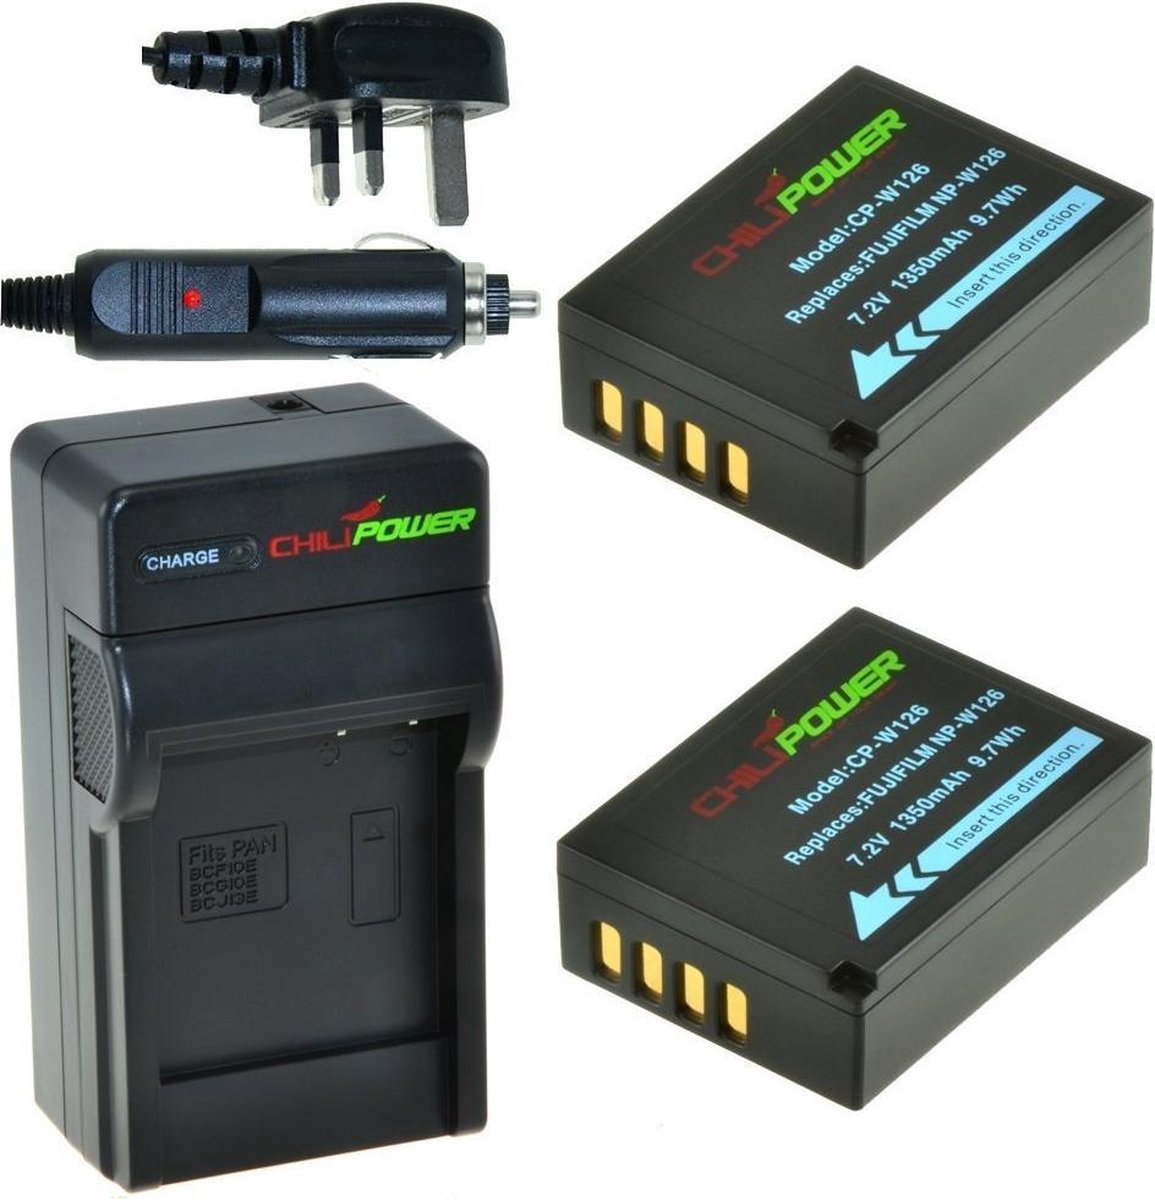 ChiliPower 2 x NP-W126 accu's voor Fujifilm - Charger Kit + car-charger - UK version